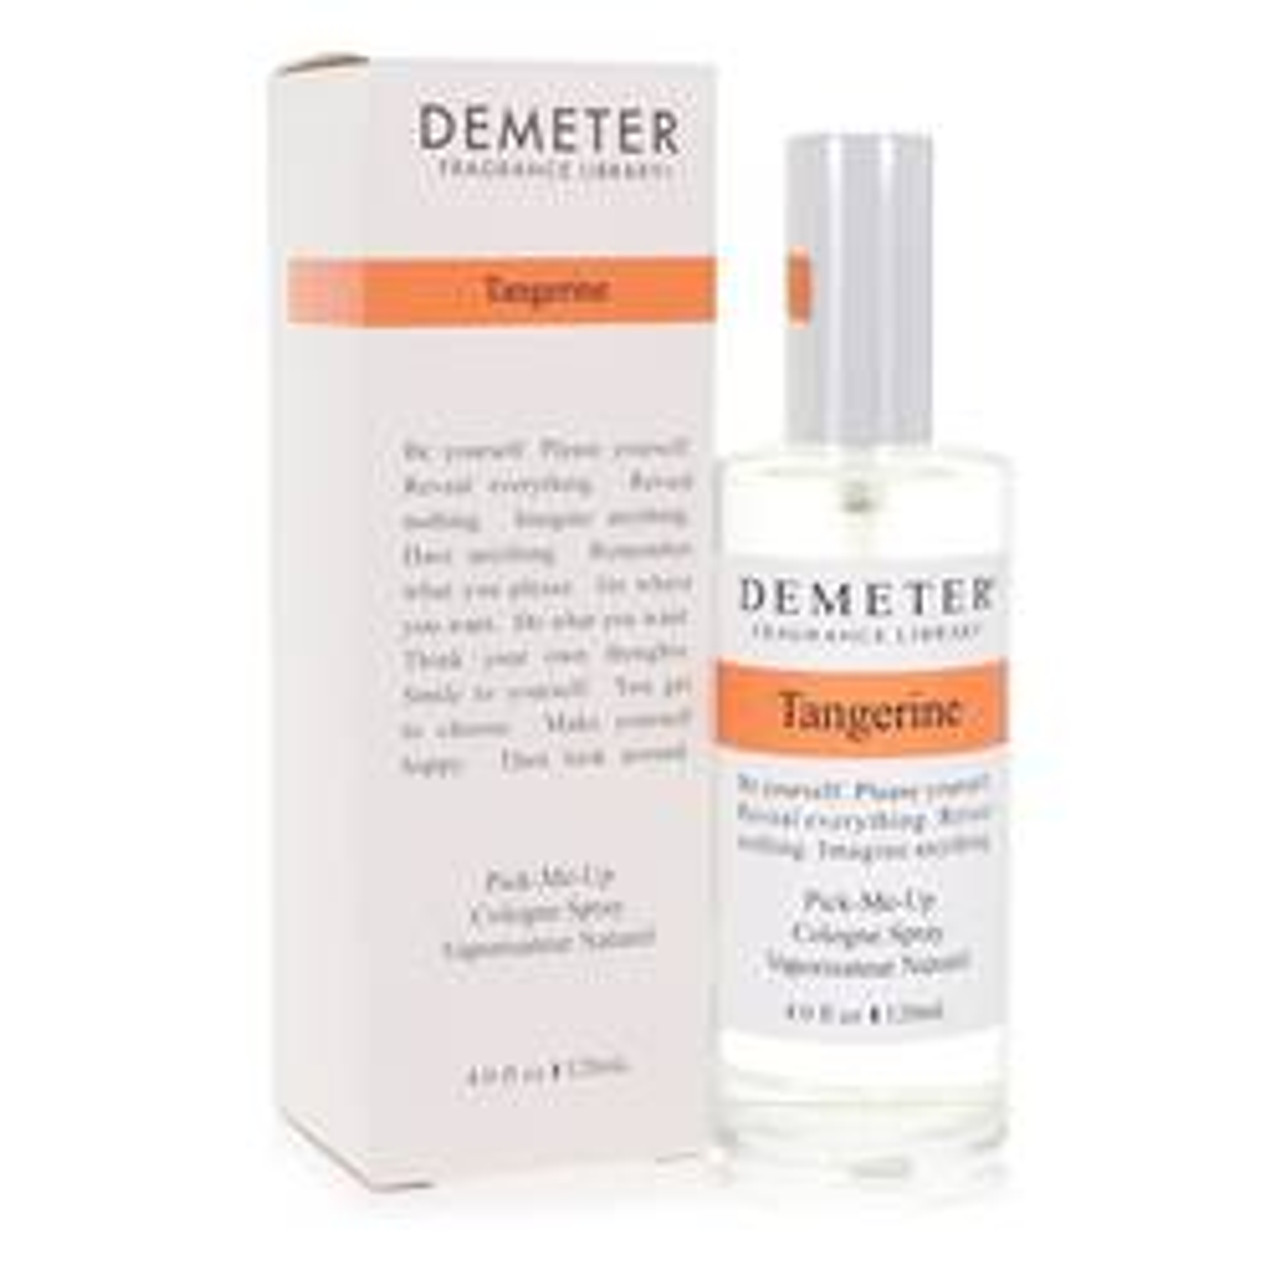 Demeter Tangerine Perfume By Demeter Cologne Spray 4 oz for Women - [From 79.50 - Choose pk Qty ] - *Ships from Miami